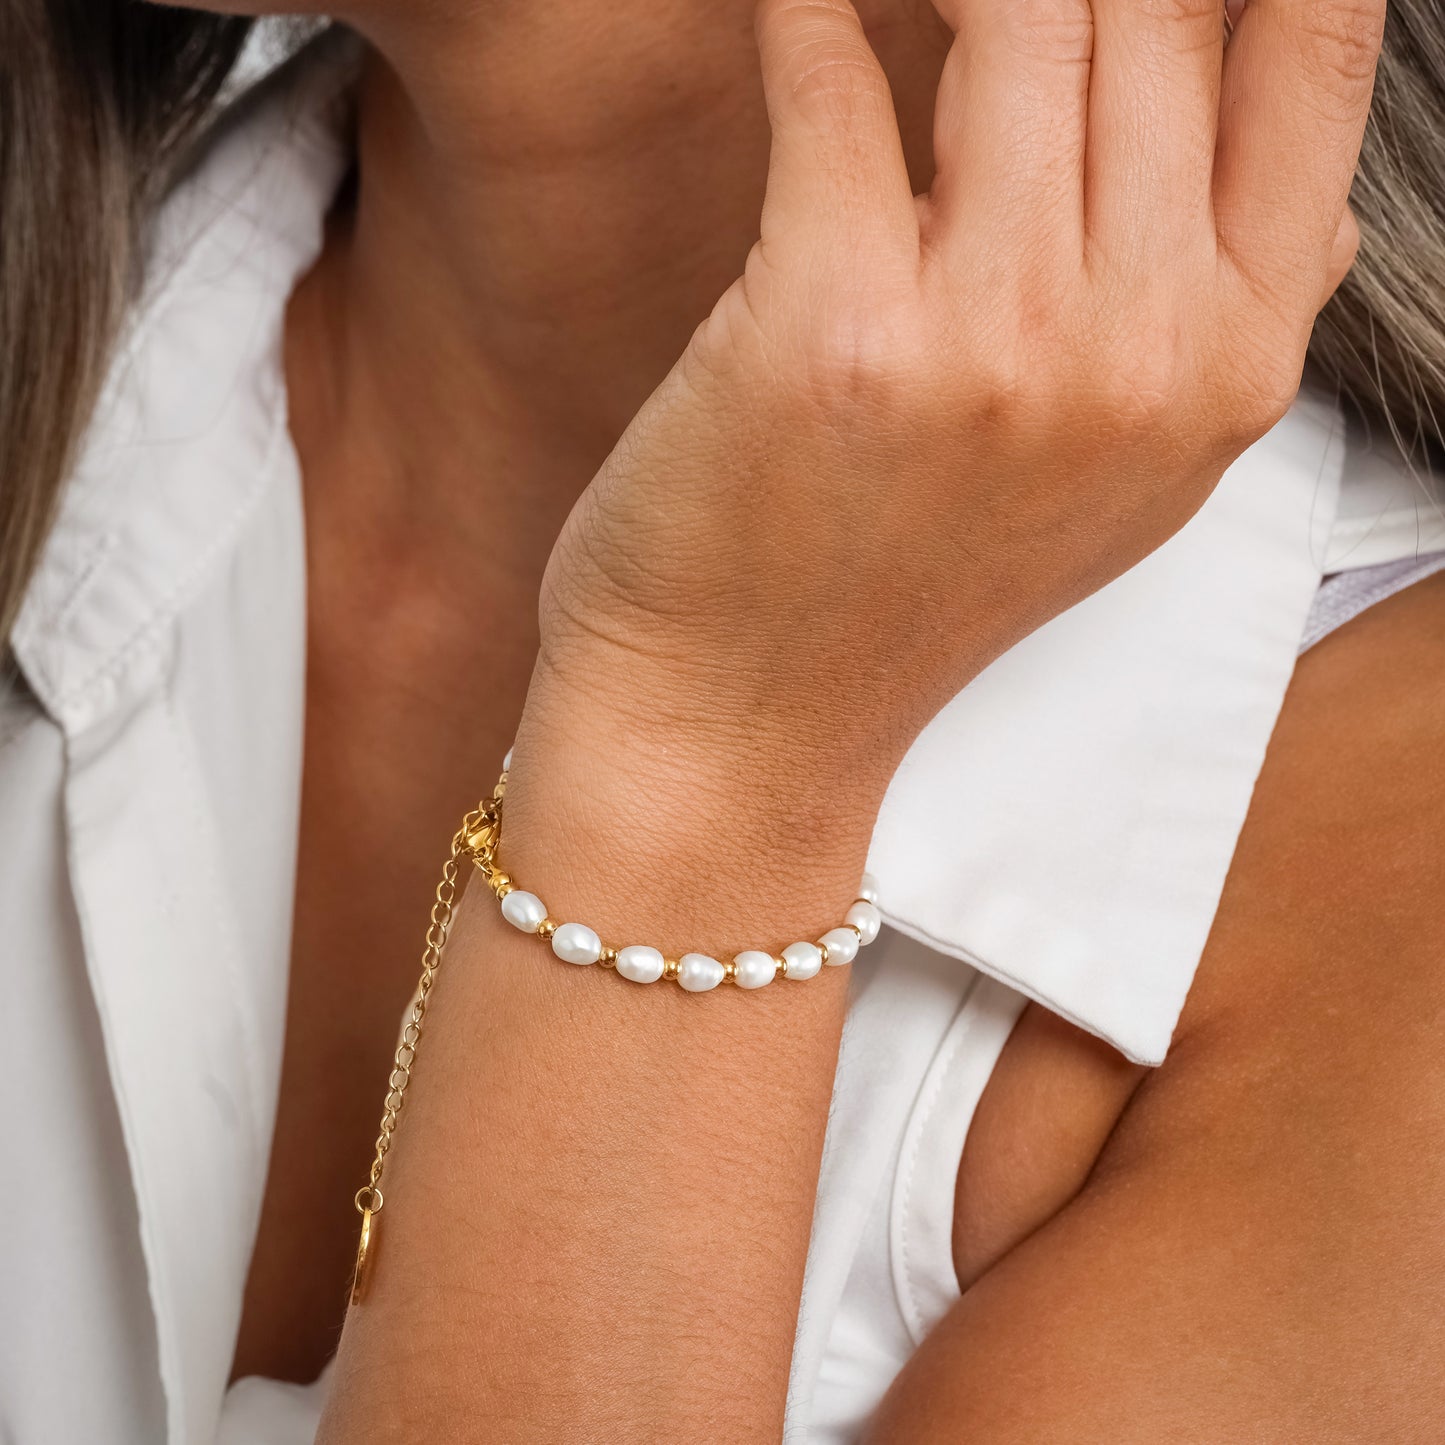 Model in a white sleeveless top wearing Gold Bead Pearl bracelet. Close-up image of the bracelet.